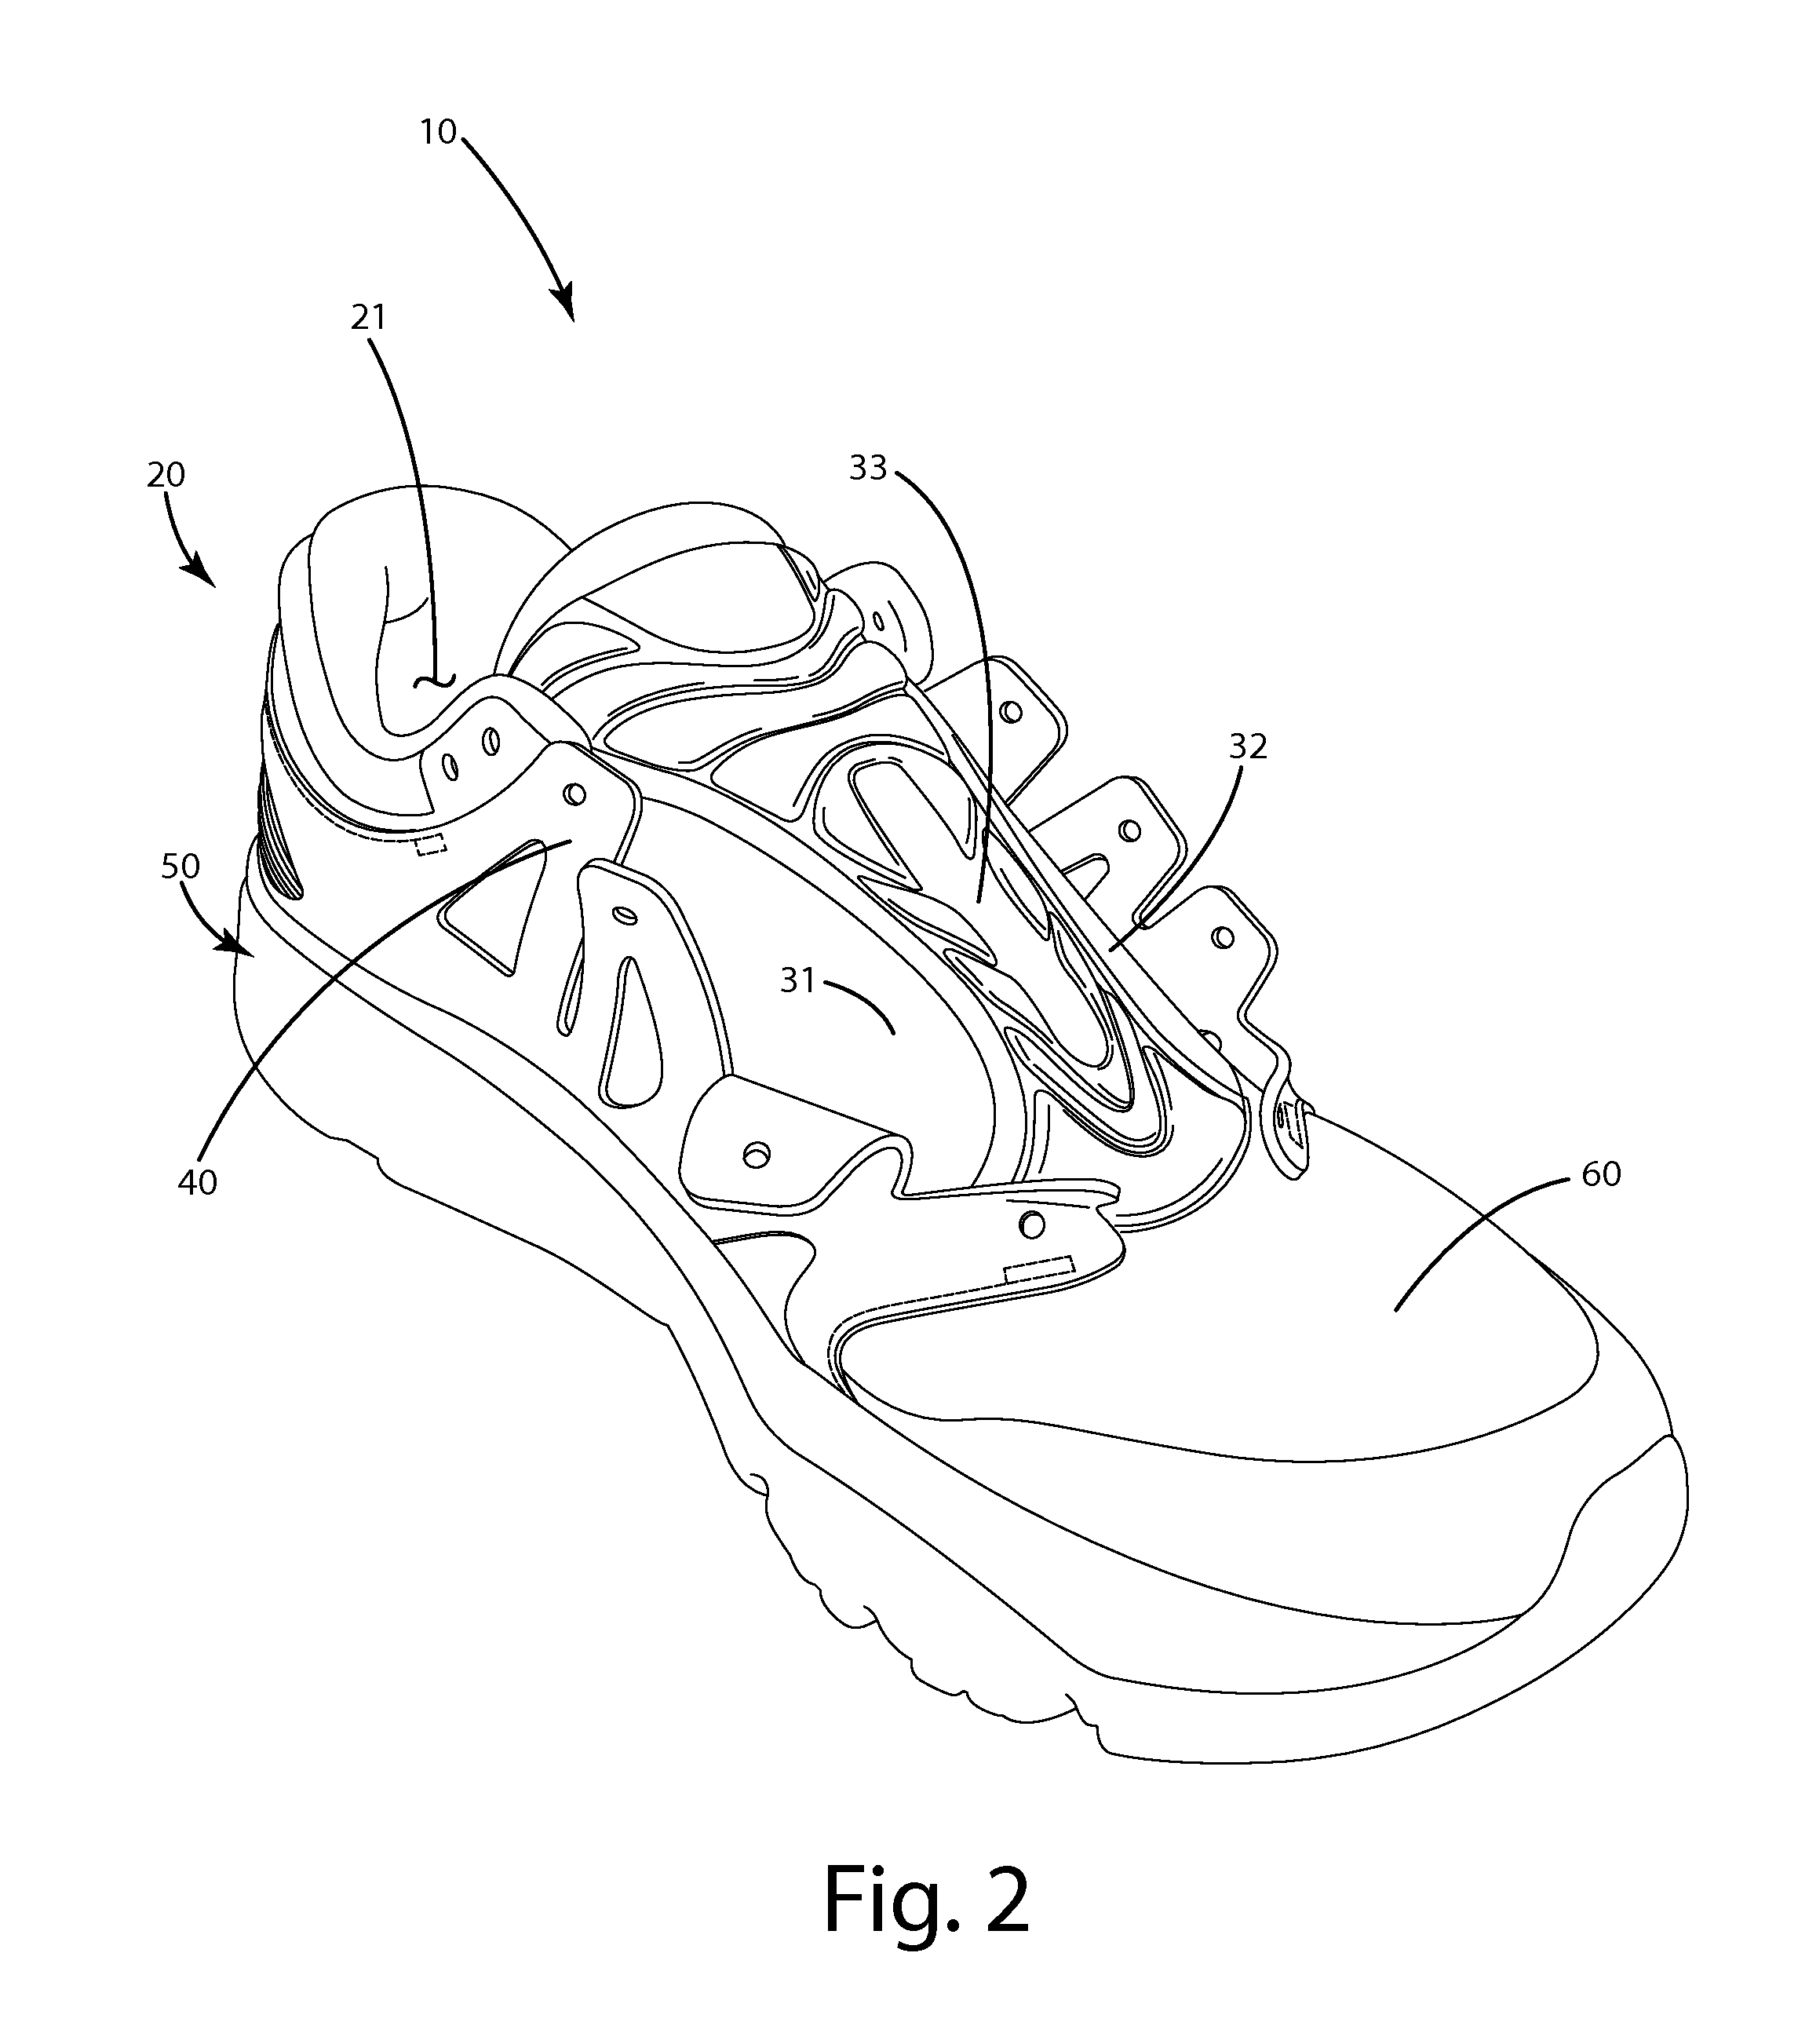 Footwear including a support cage